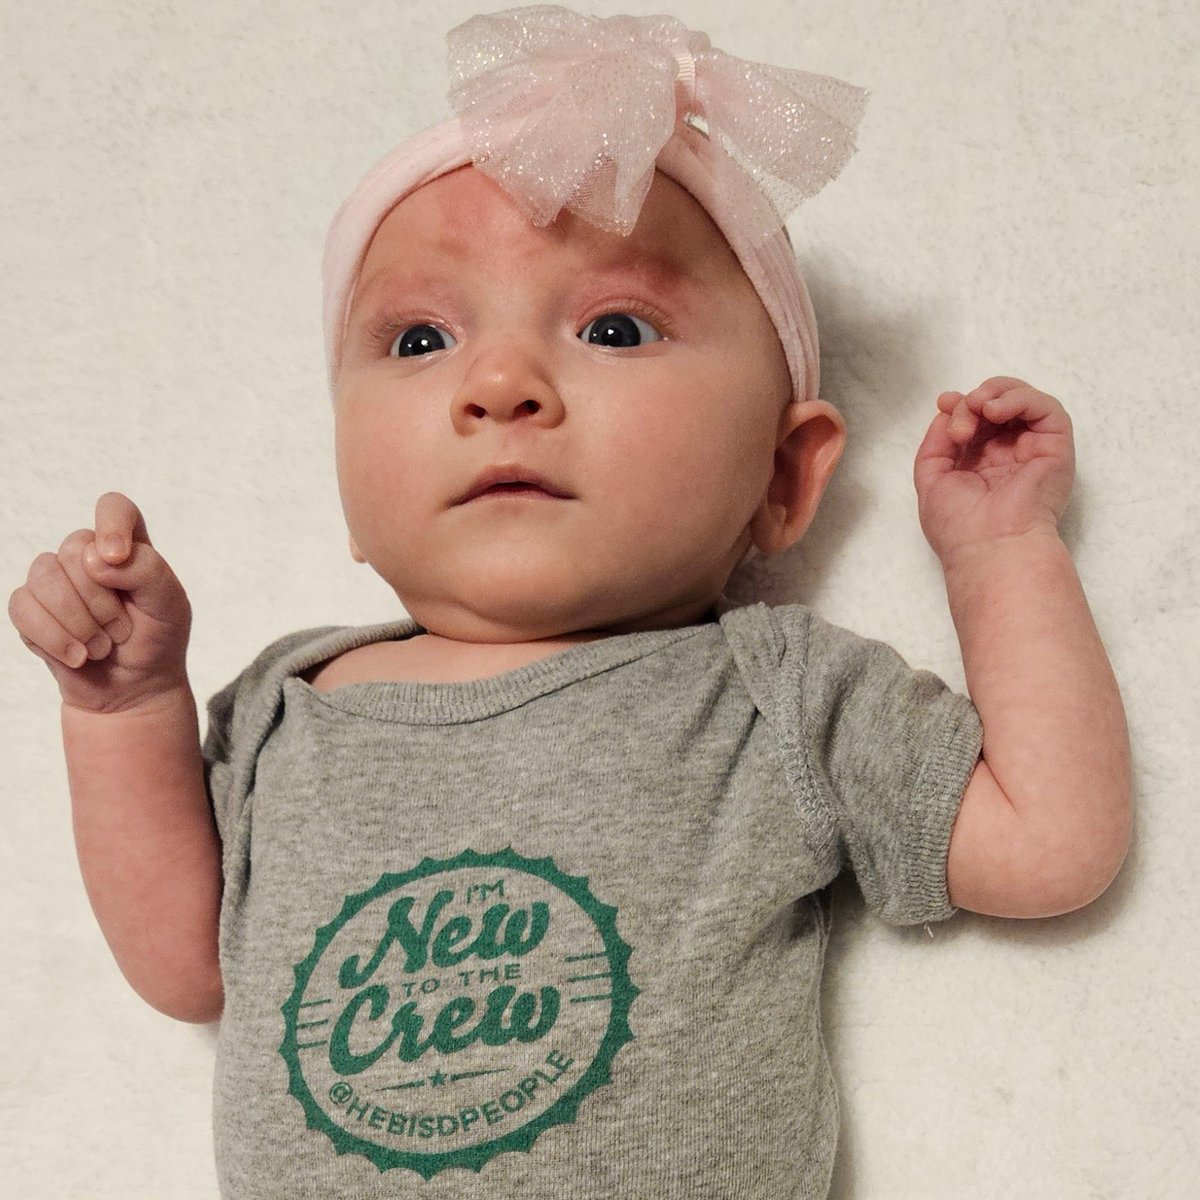 Huge congratulations to Lauren Highberg (teacher at Shady Brook Elementary) on the arrival of sweet baby Clara.🎉 Wishing you and your precious little one a lifetime of love, laughter, and beautiful moments. #newtothecrew #YourFamilyIsOurFamily @HEBISDpeople